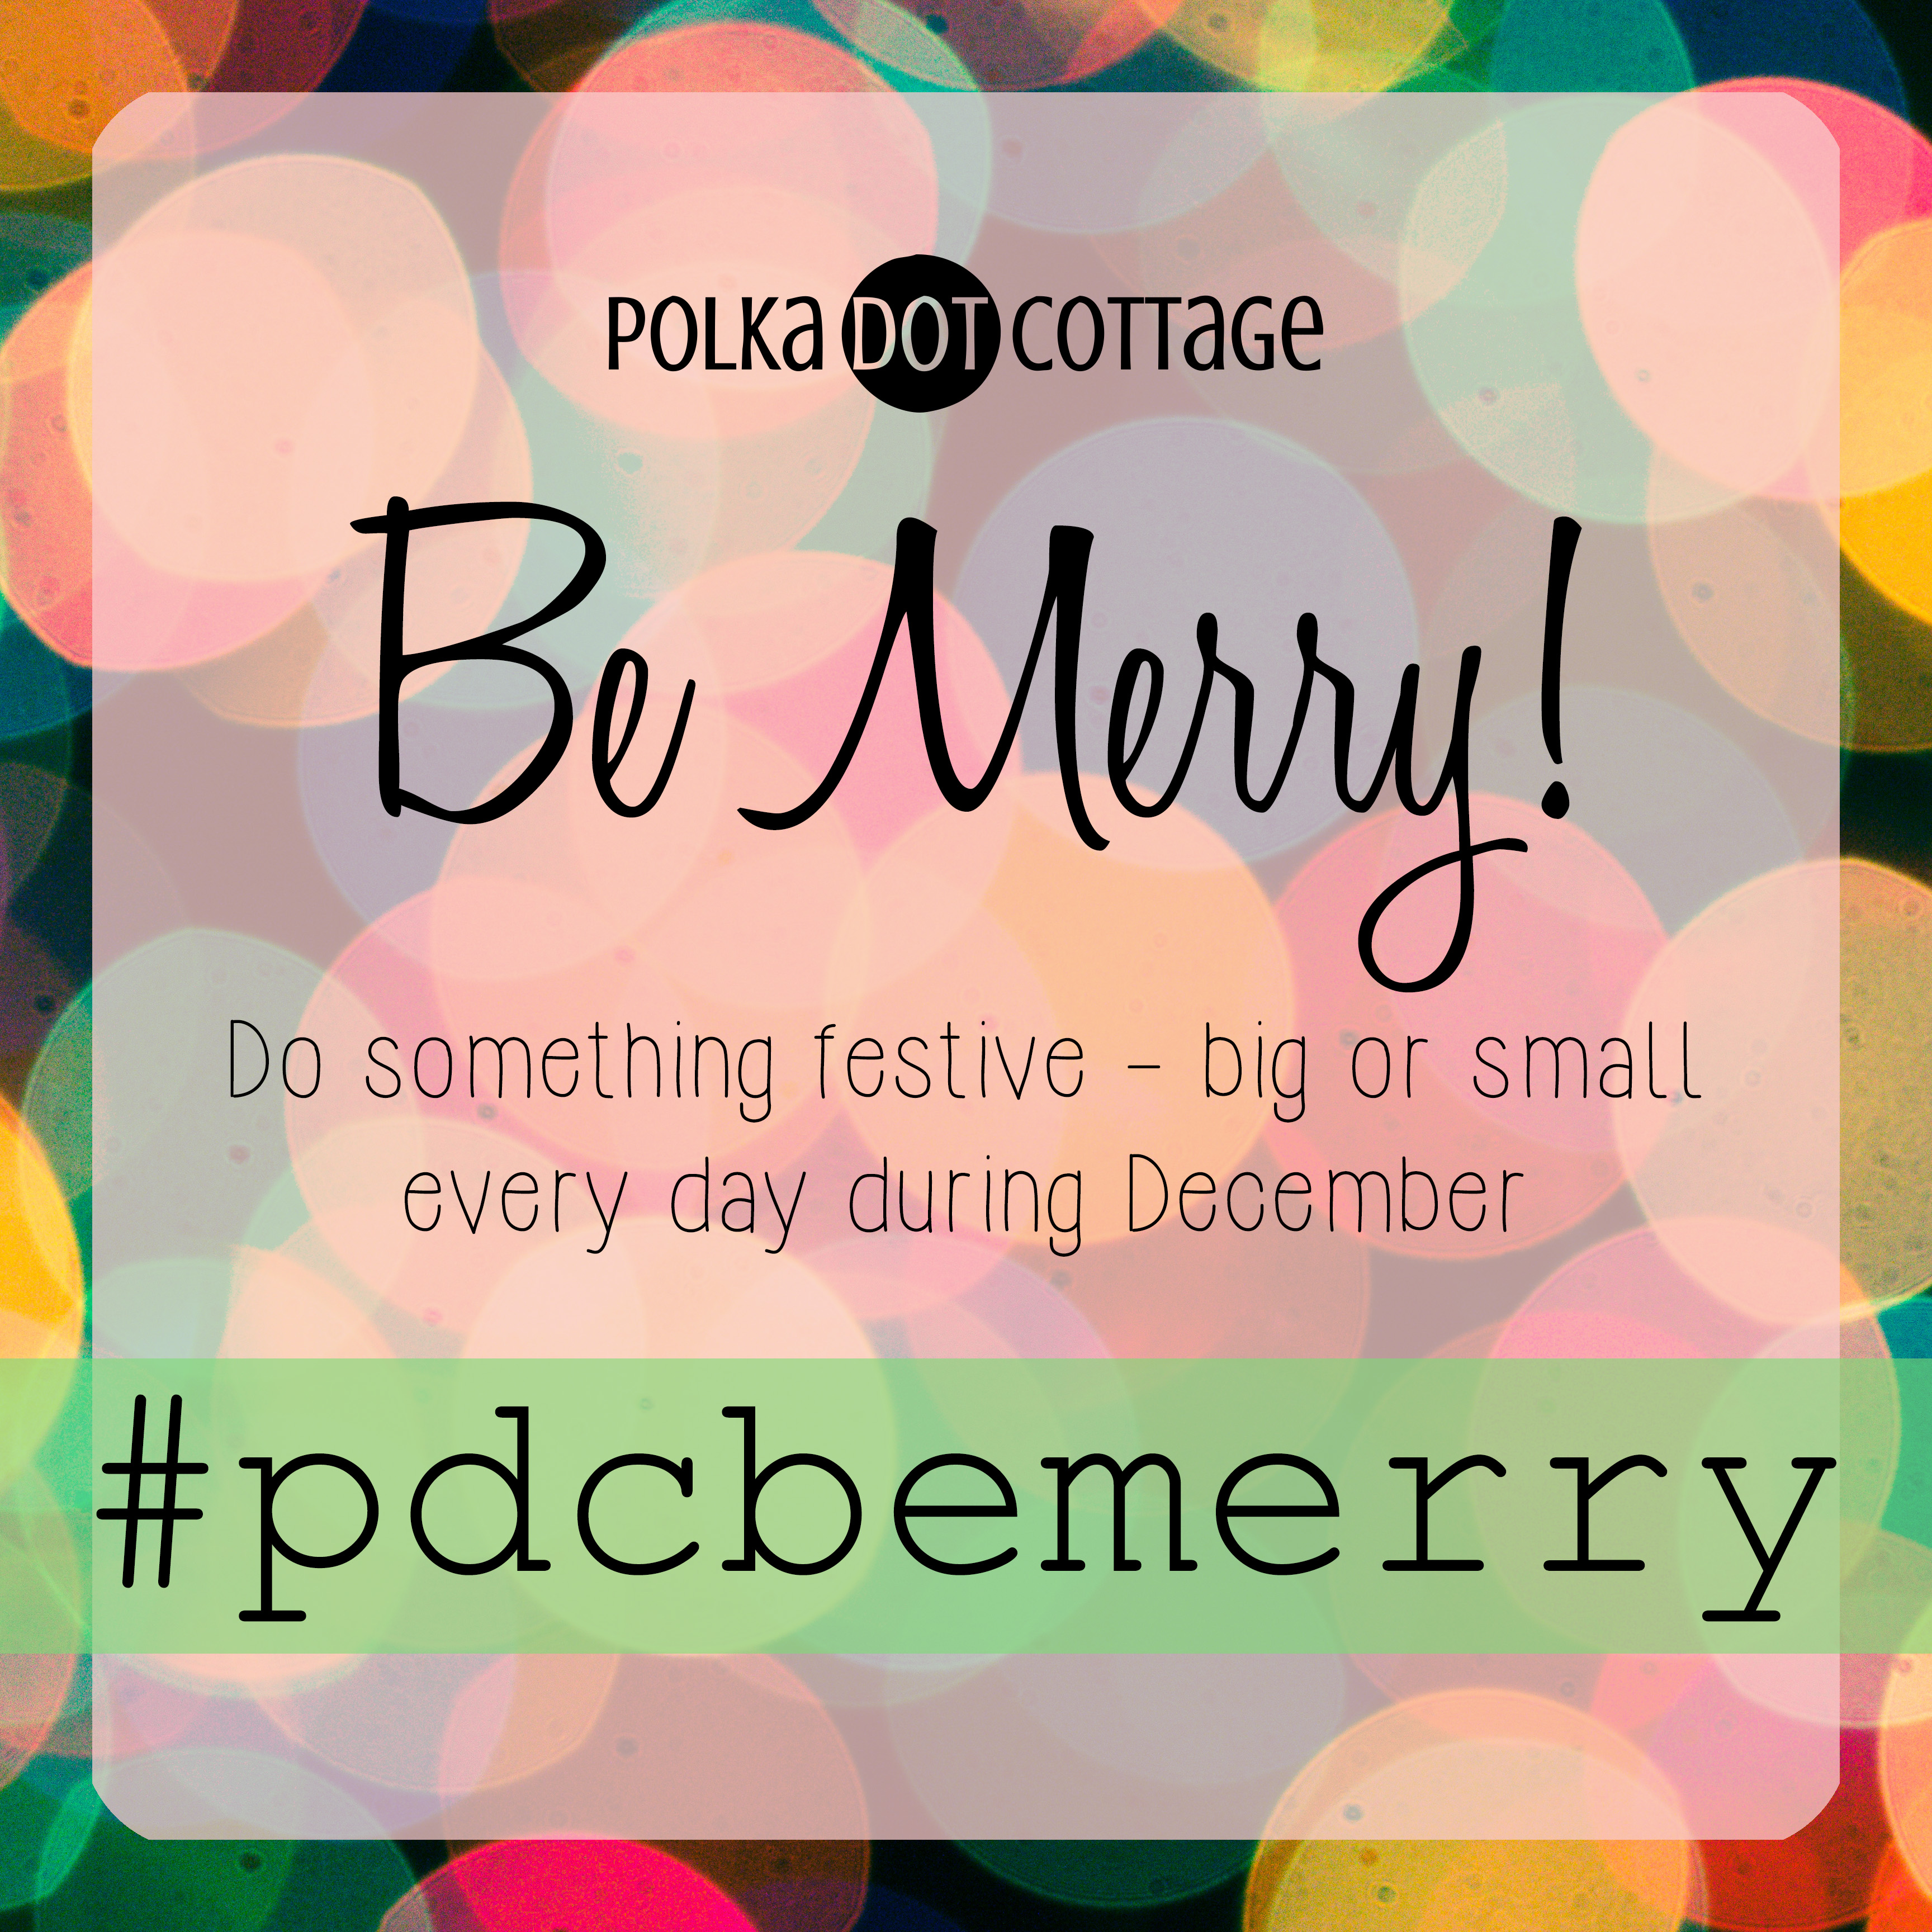 pdcbemerry on Instagram